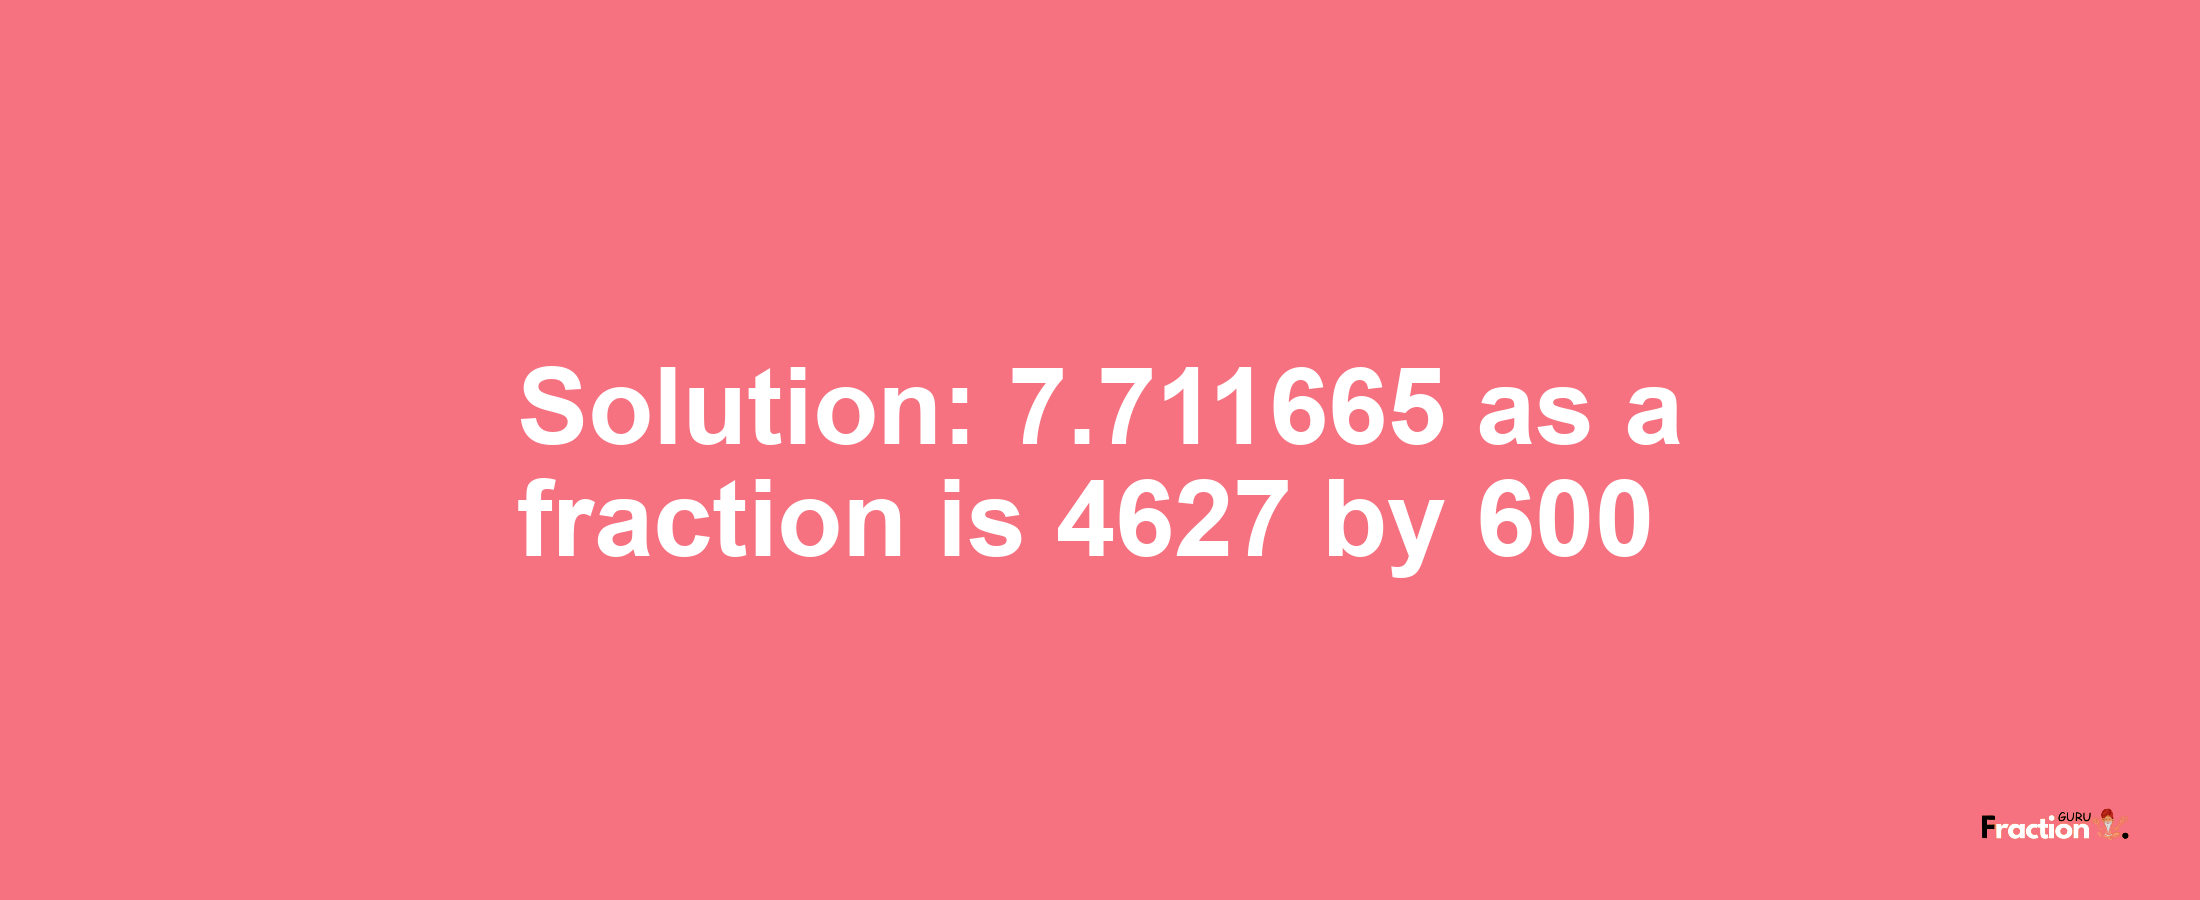 Solution:7.711665 as a fraction is 4627/600